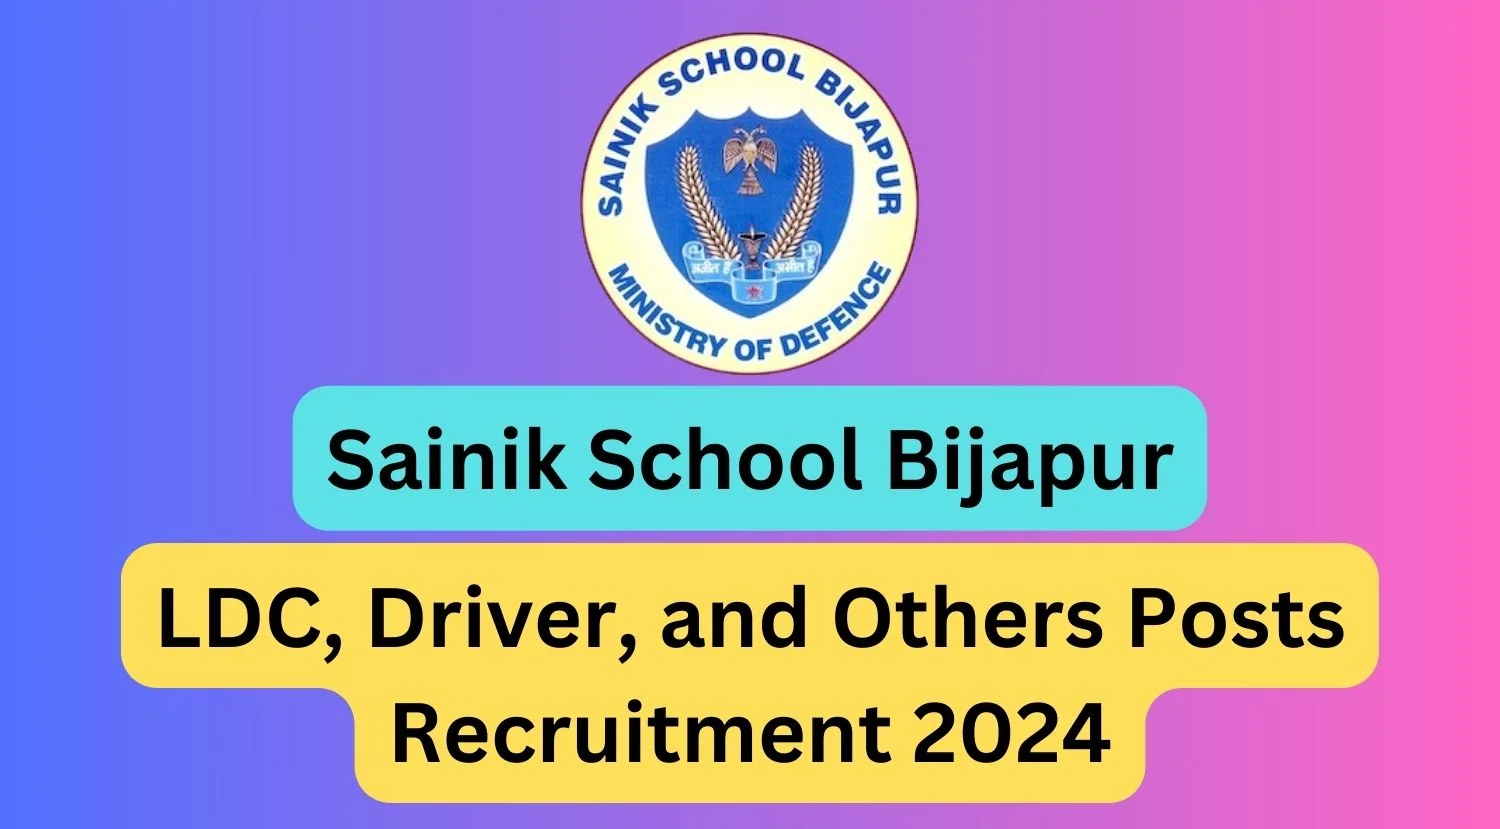 Sainik School Bijapur Recruitment 2024 Notification Out for LDC, Driver, and Others Posts